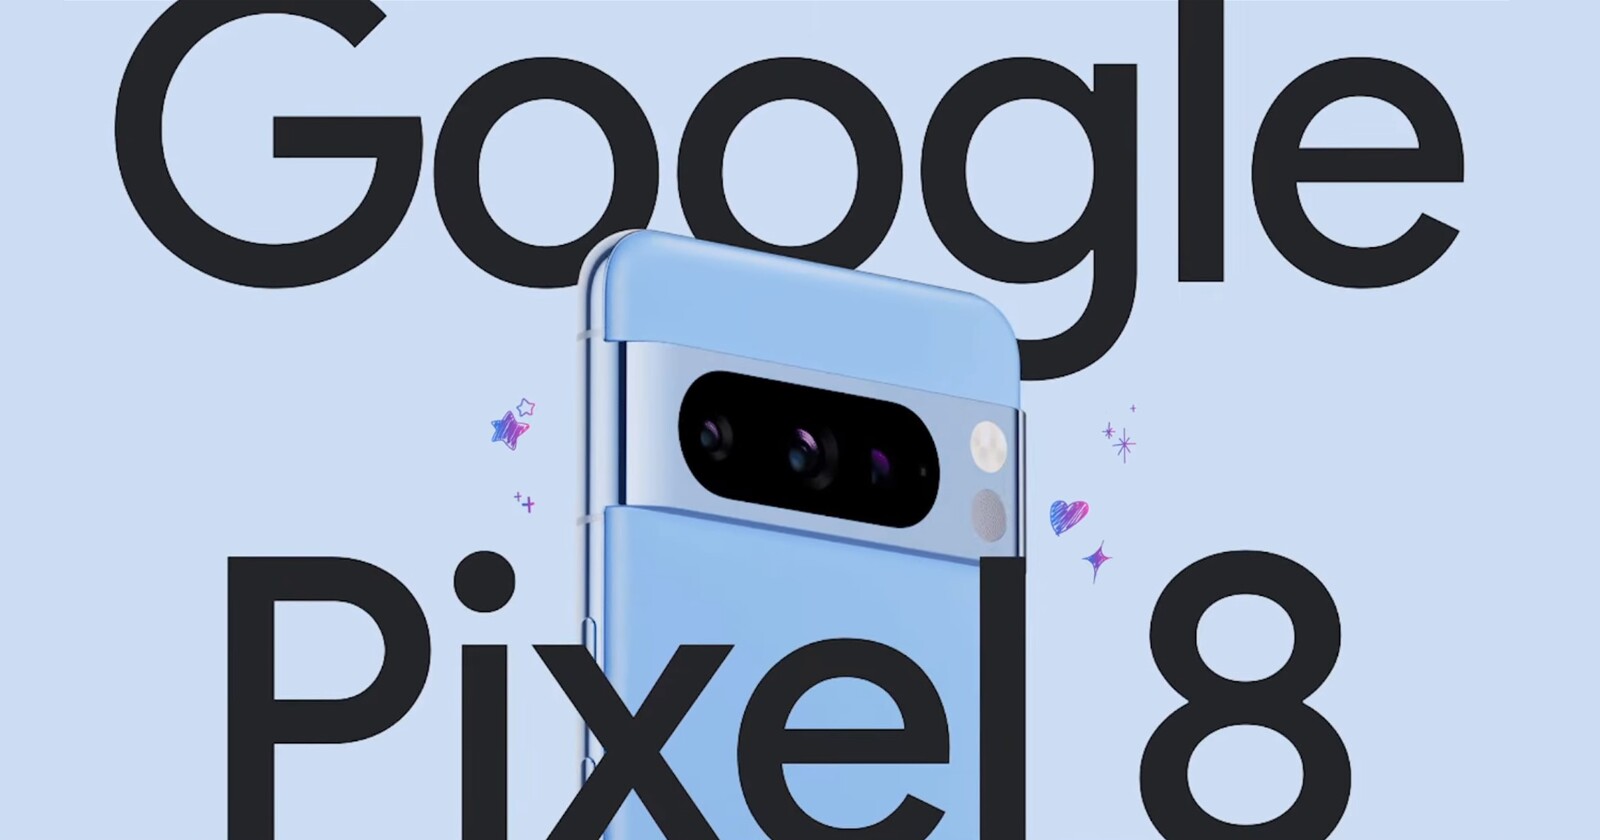 Google's latest ad highlights ongoing craze for Pixel 8's 'Best Take' in Japan